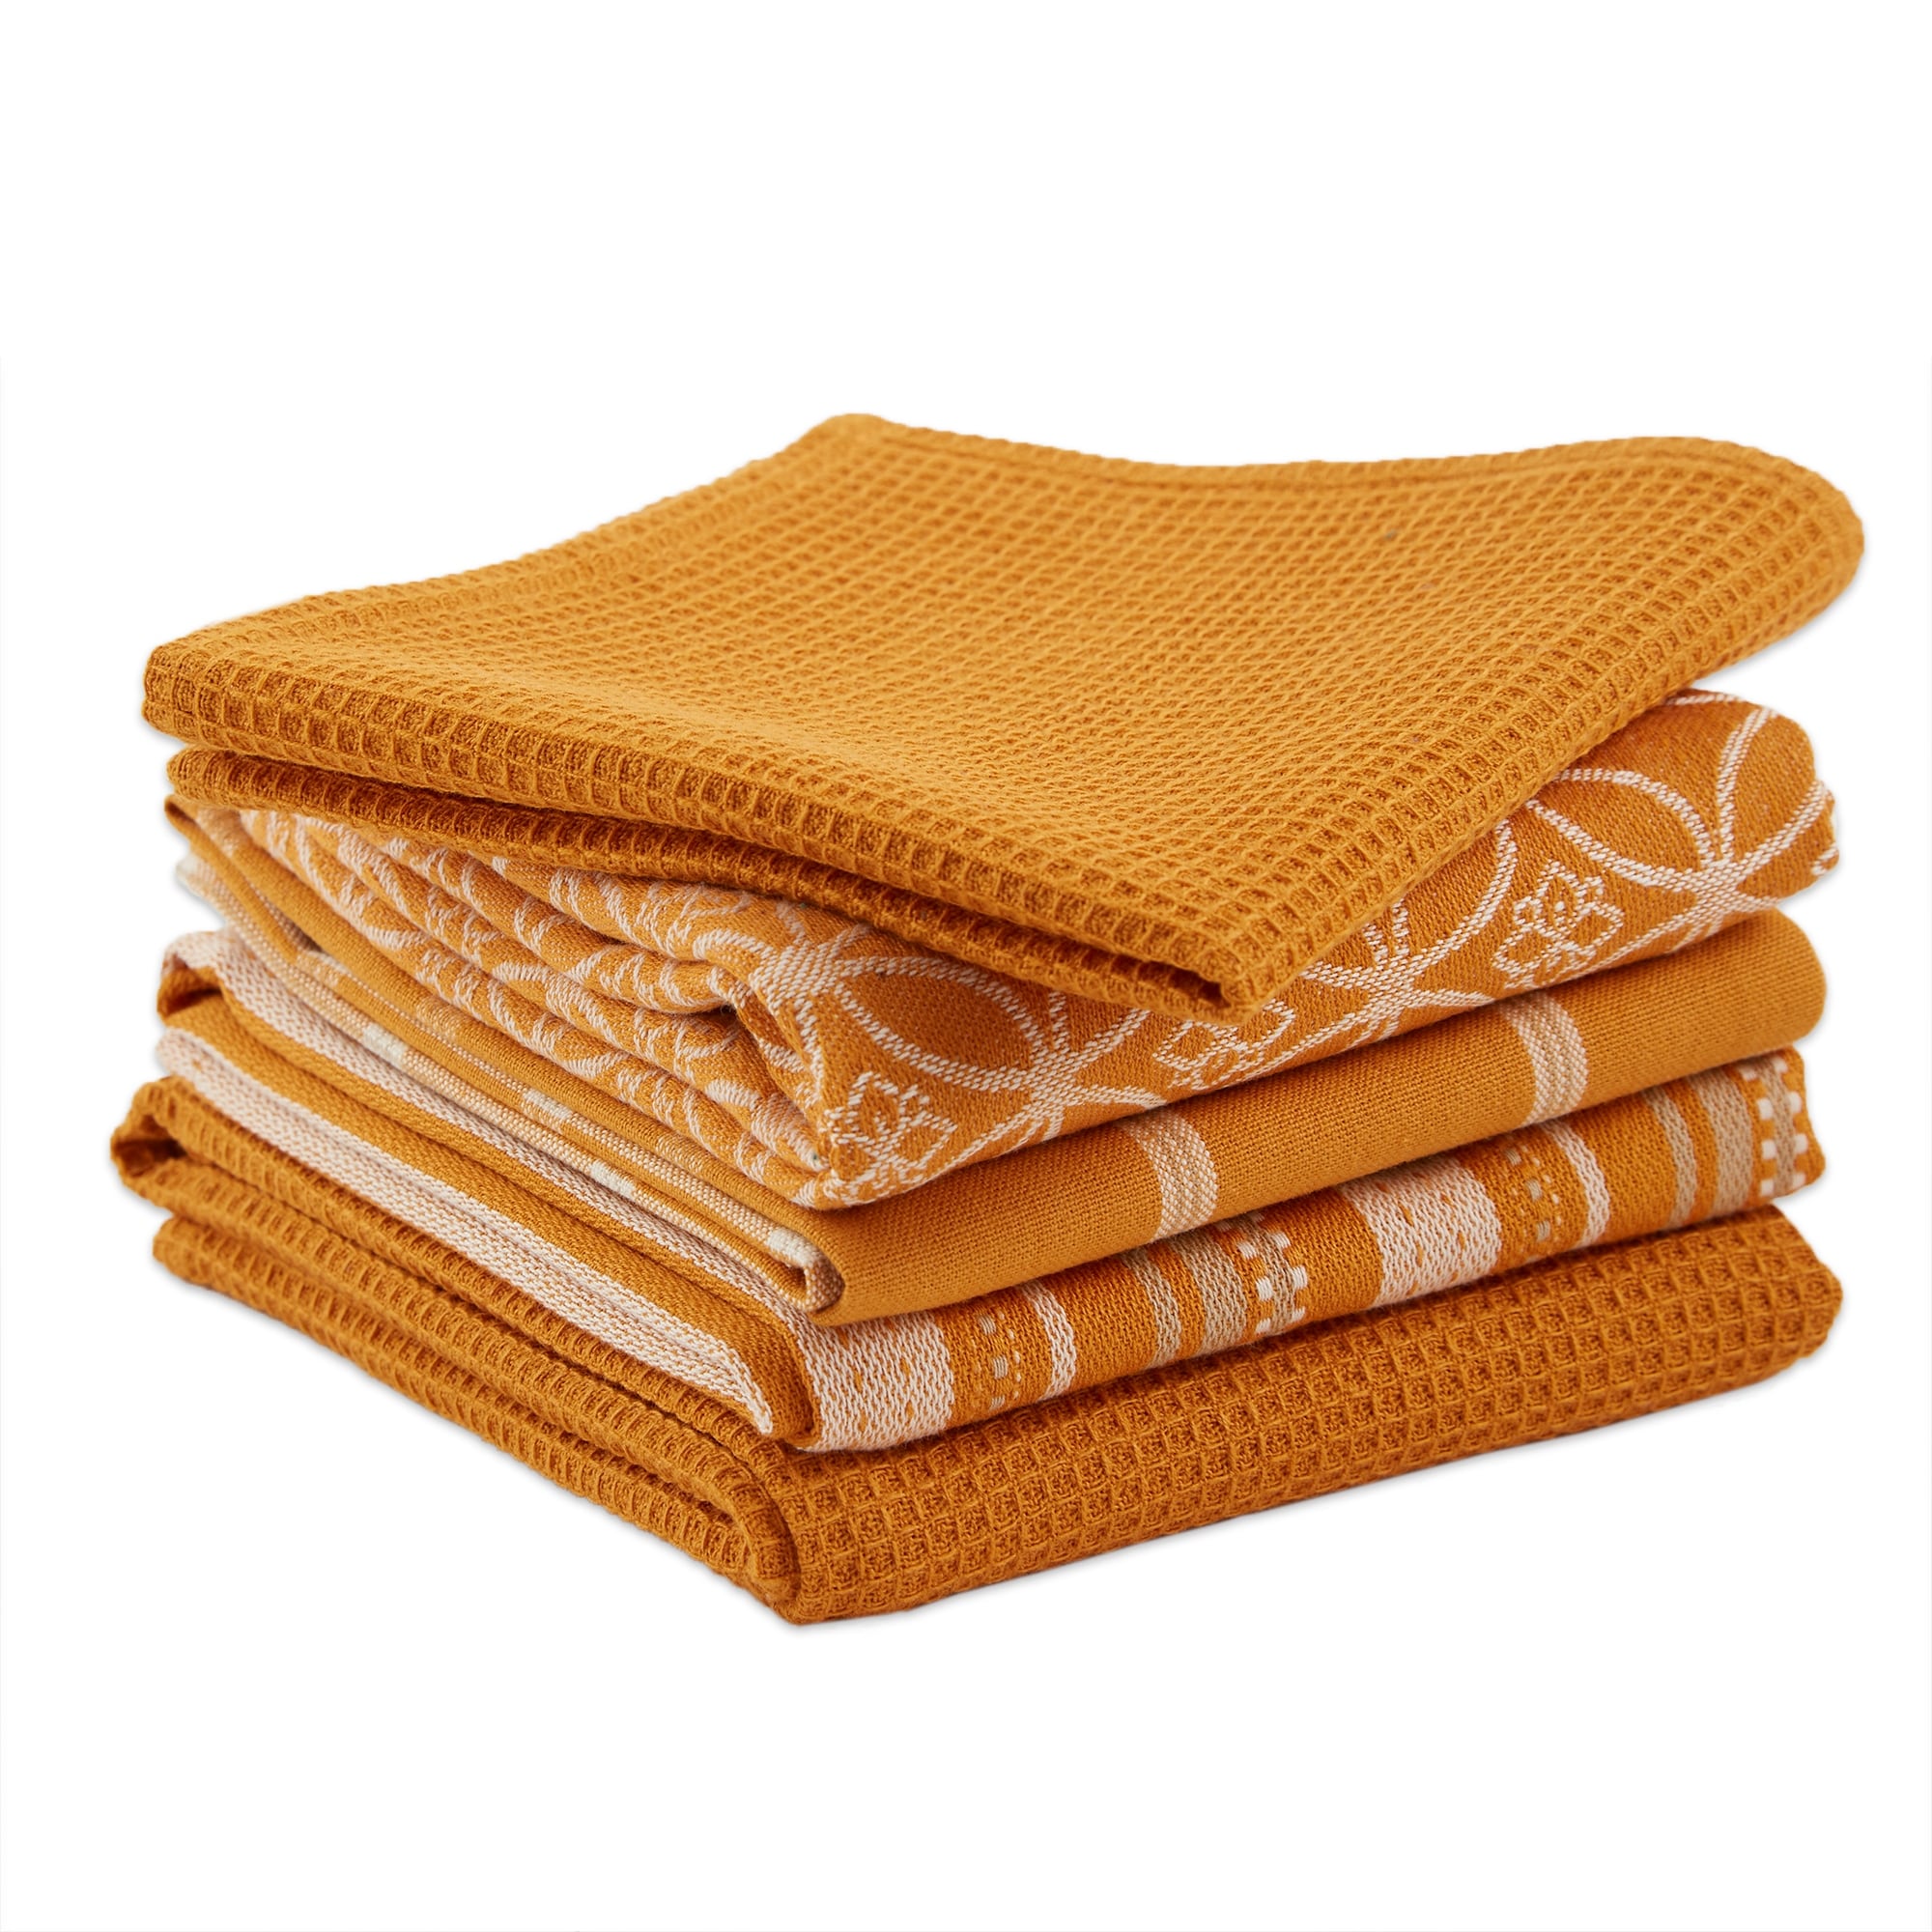 Design Imports Assorted Woven Kitchen Towel 5-pack - 9605511